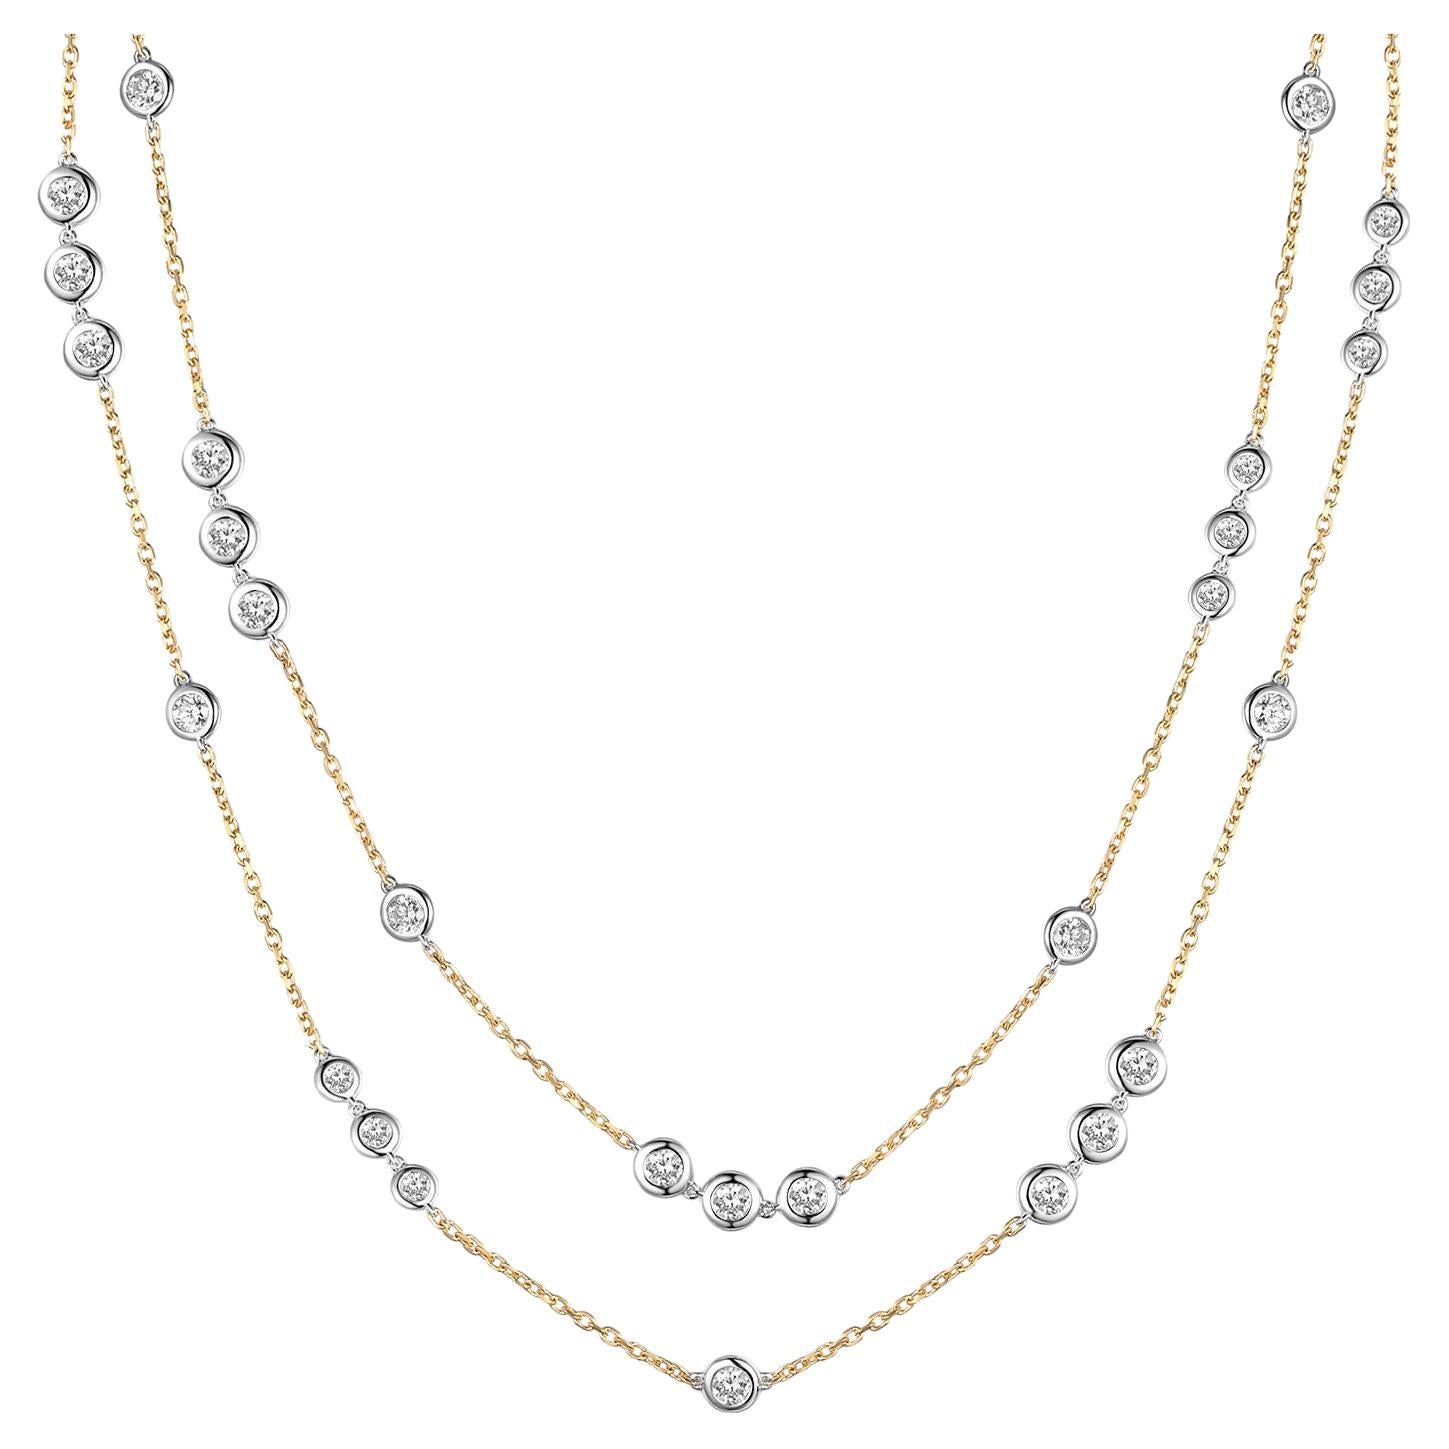 4.12 Carat 29-Station Diamond by The Yard Necklace in 18 Karat Yellow Gold